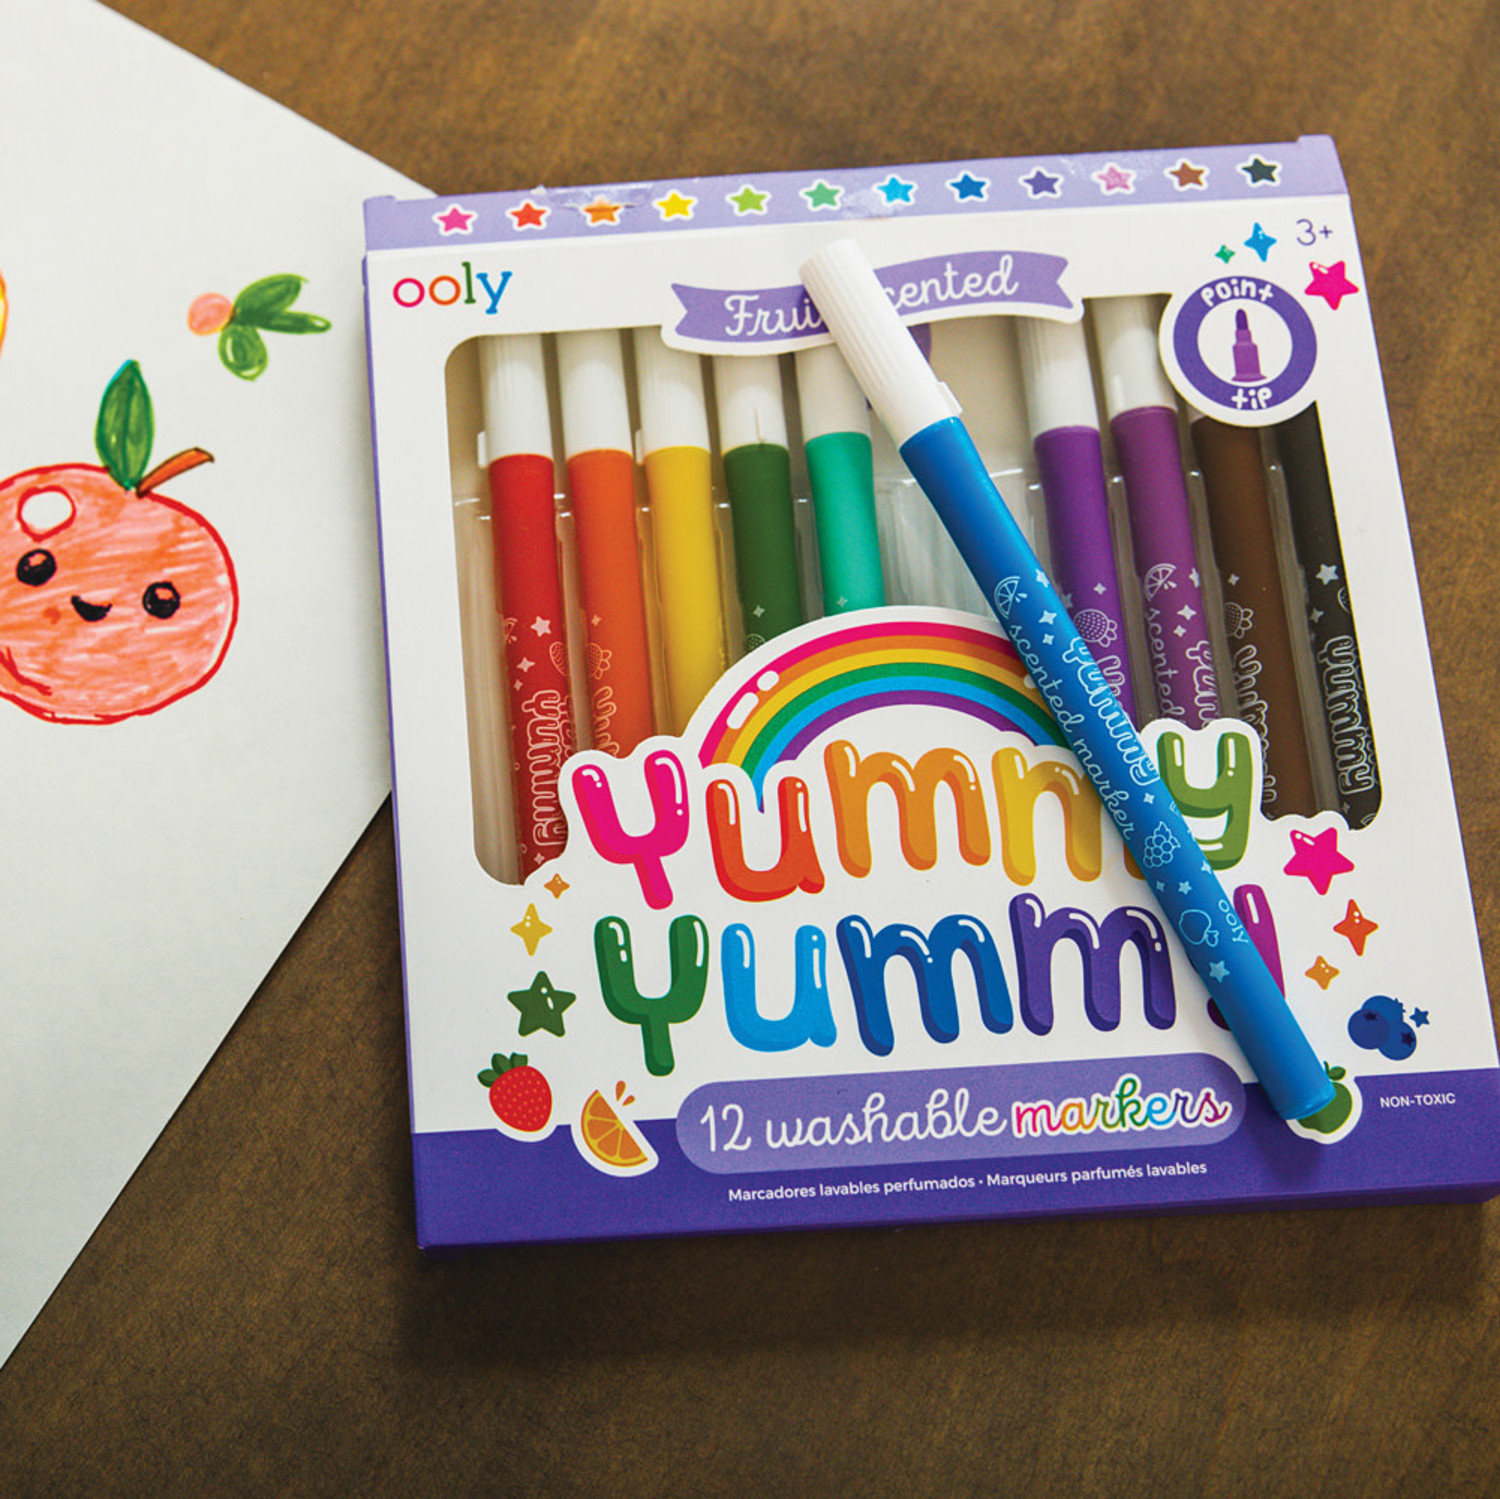 https://cdn.shoplightspeed.com/shops/653480/files/52406544/1500x4000x3/ooly-yummy-yummy-scented-washable-markers-set-of-1.jpg